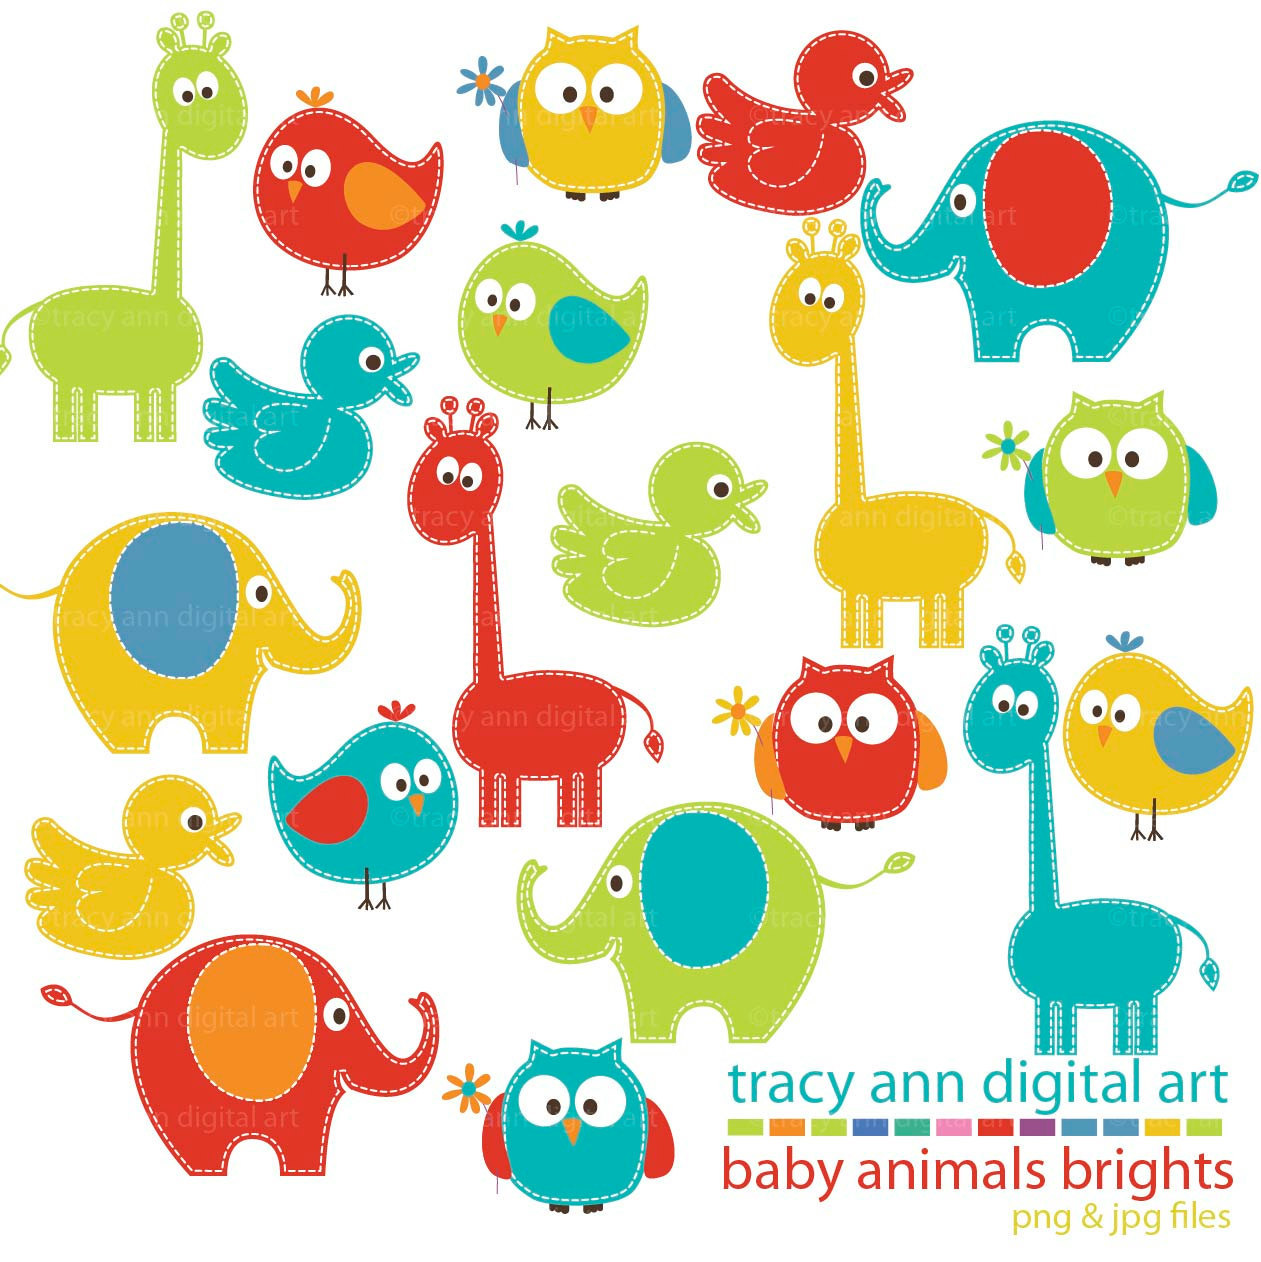 Popular items for baby animals clipart on Etsy